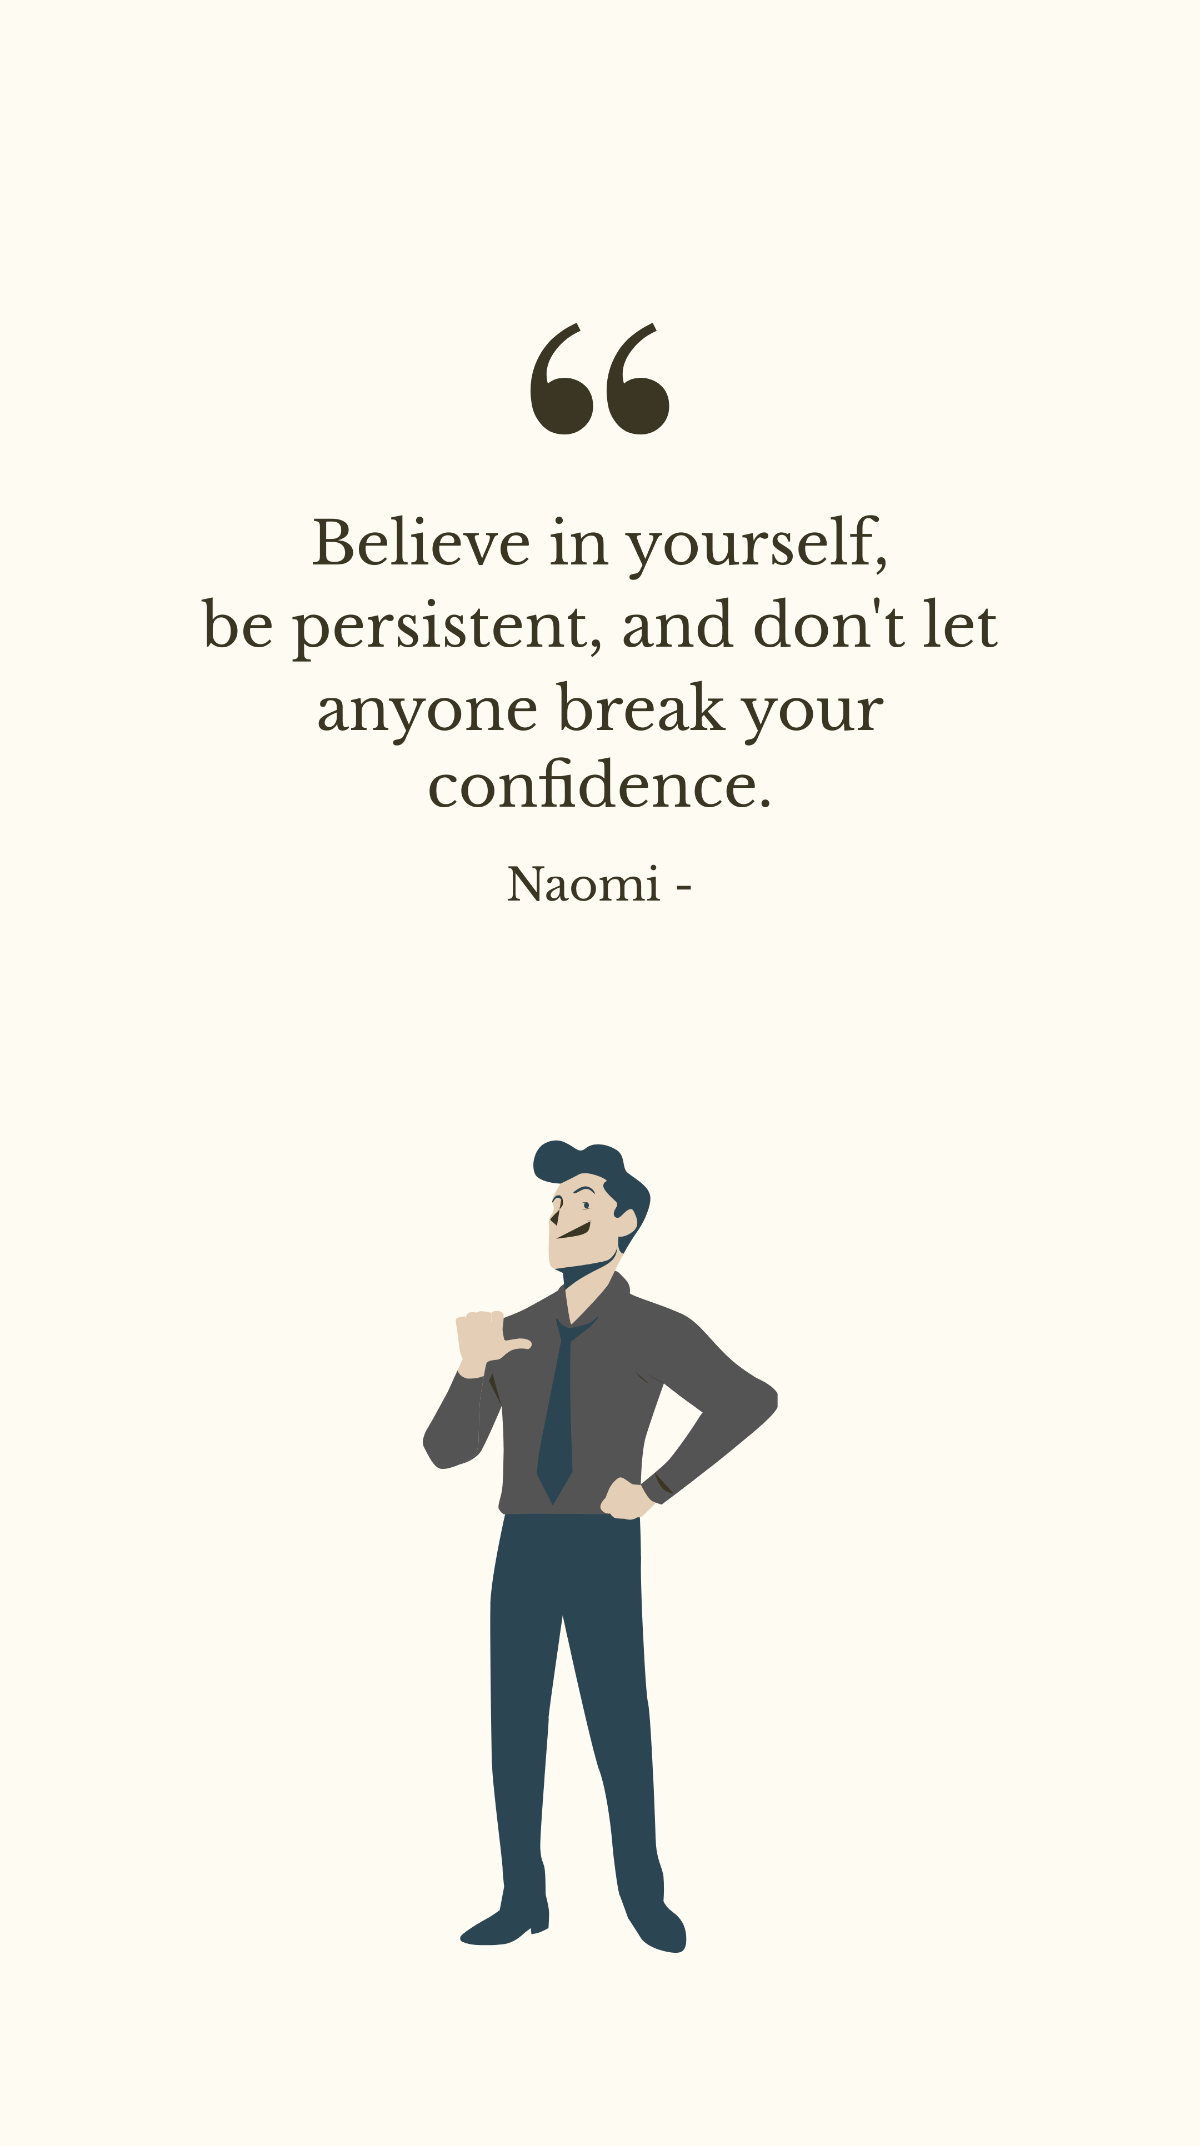 Naomi - Believe in yourself, be persistent, and don't let anyone break your confidence. Template